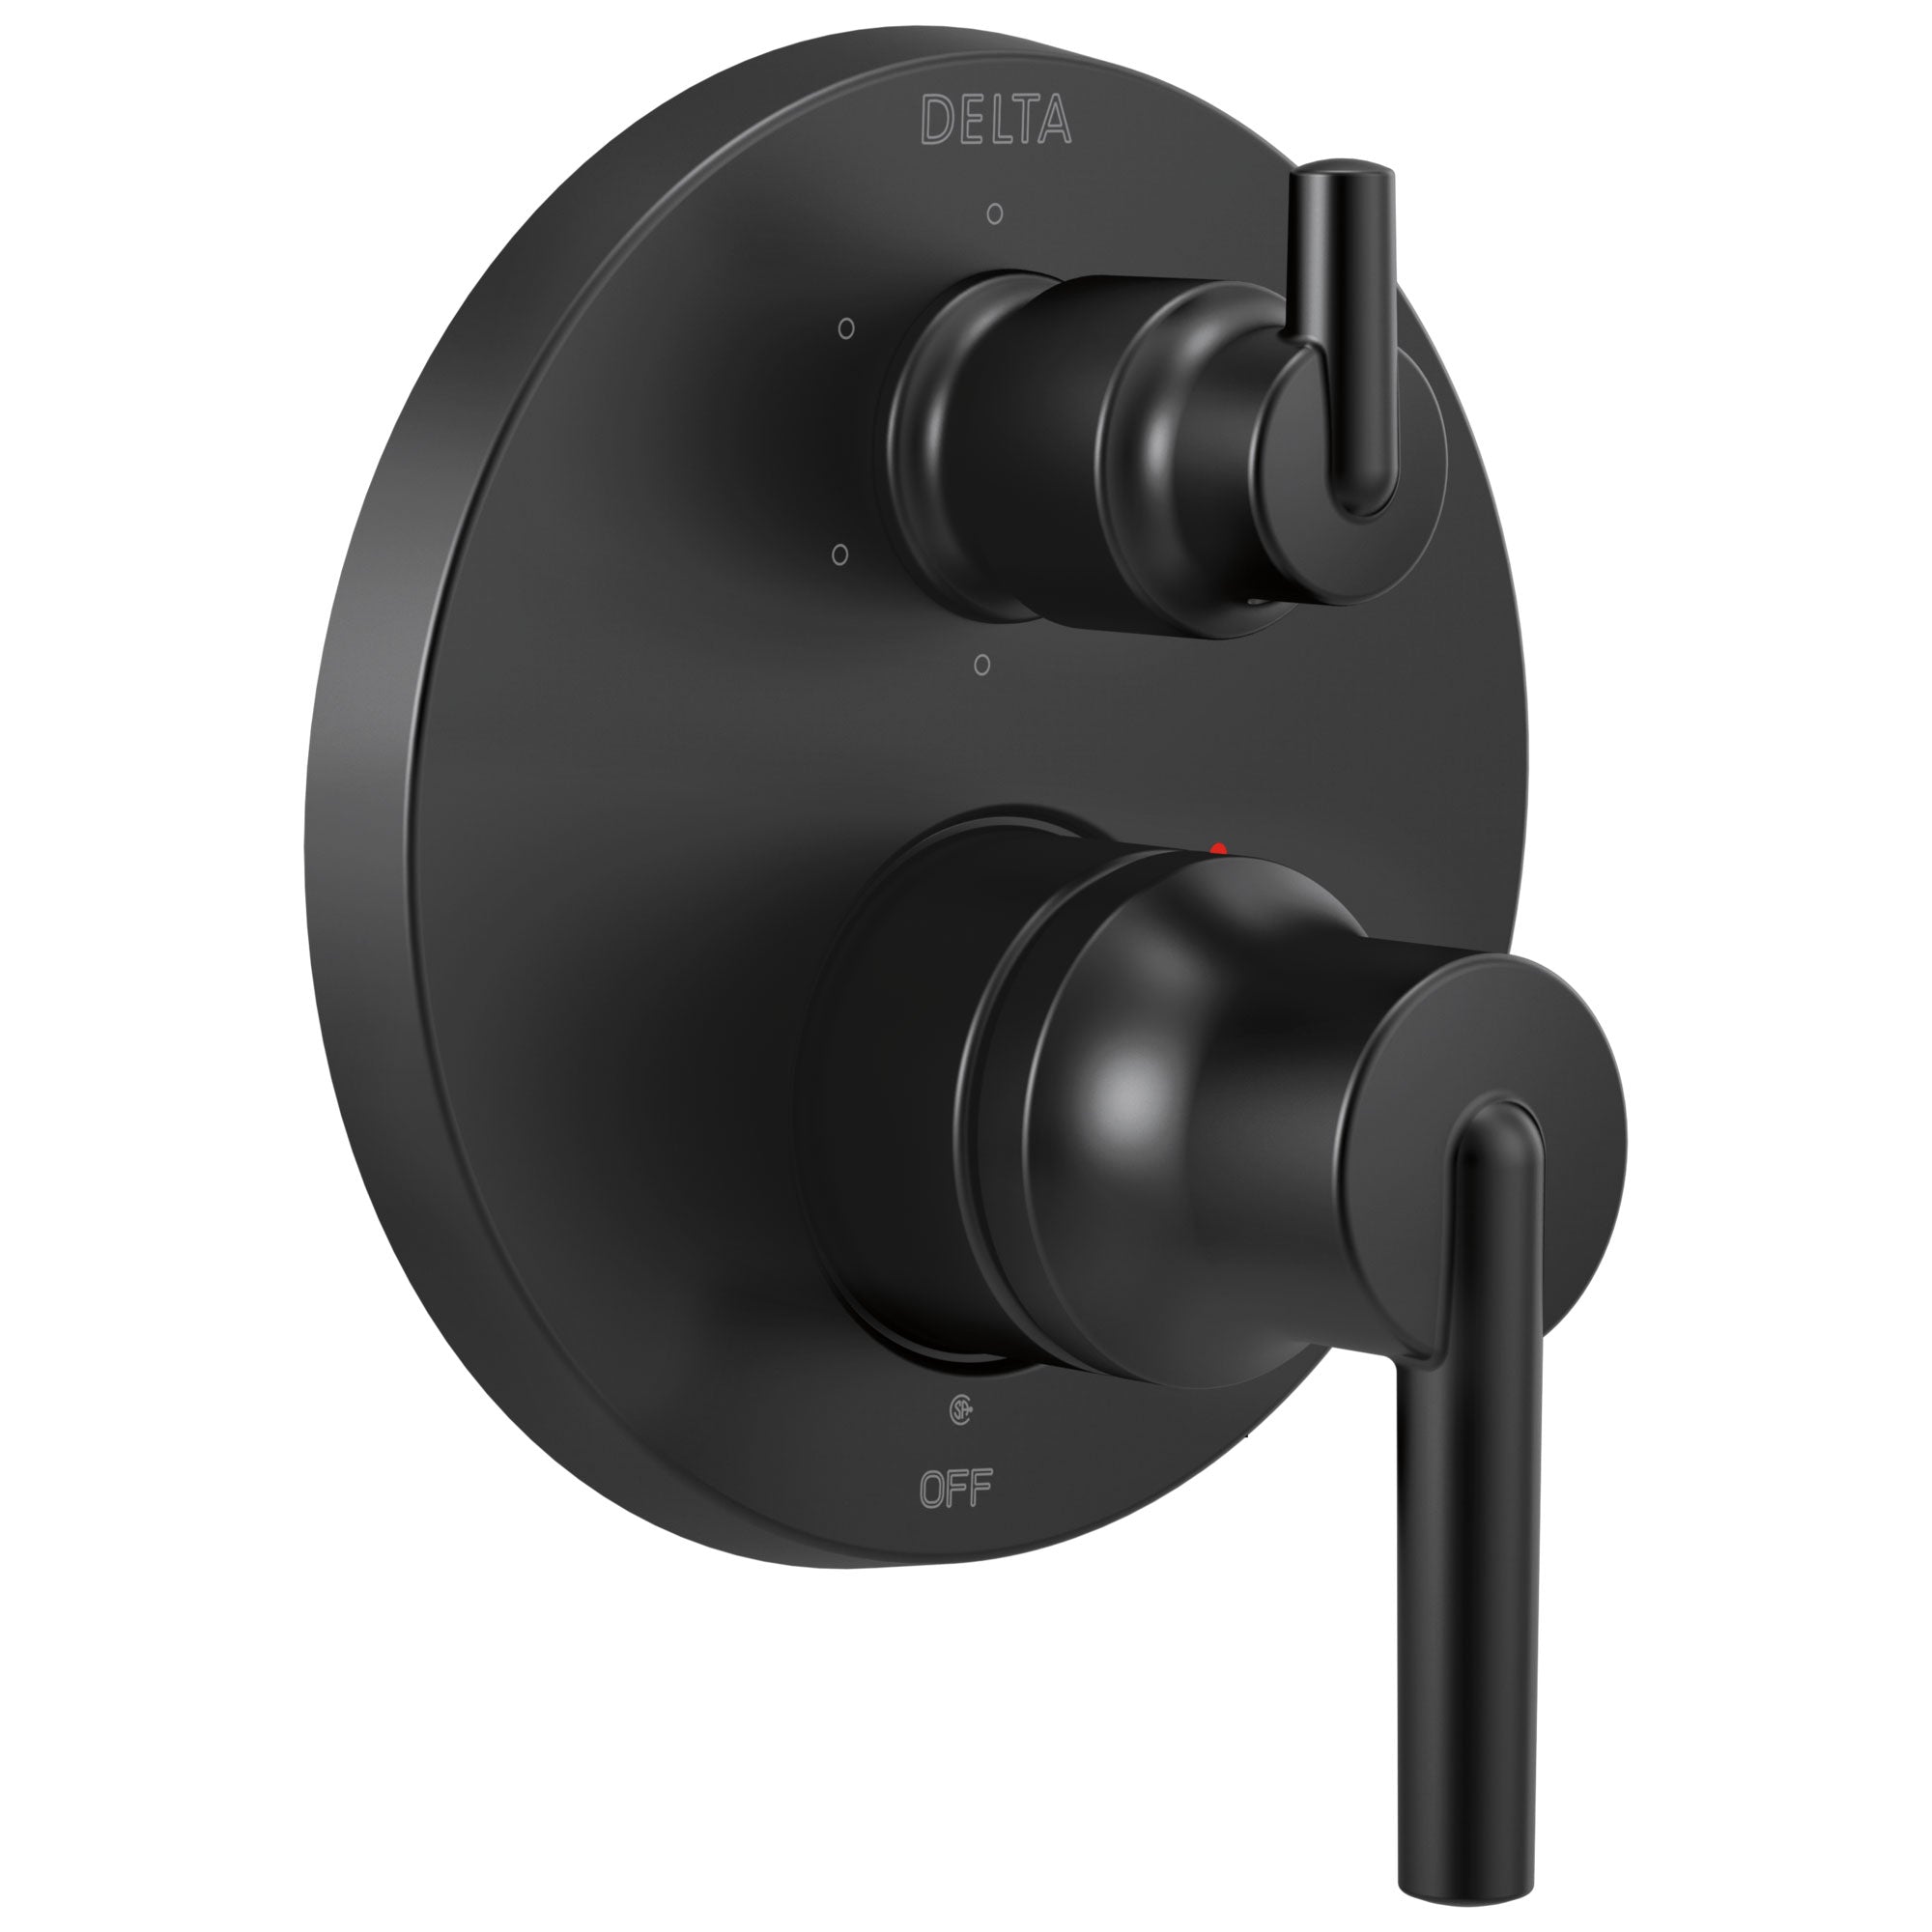 Delta Trinsic Matte Black Finish Contemporary 14 Series Shower System Control with 6-Setting Integrated Diverter Includes Valve and Handles D3187V